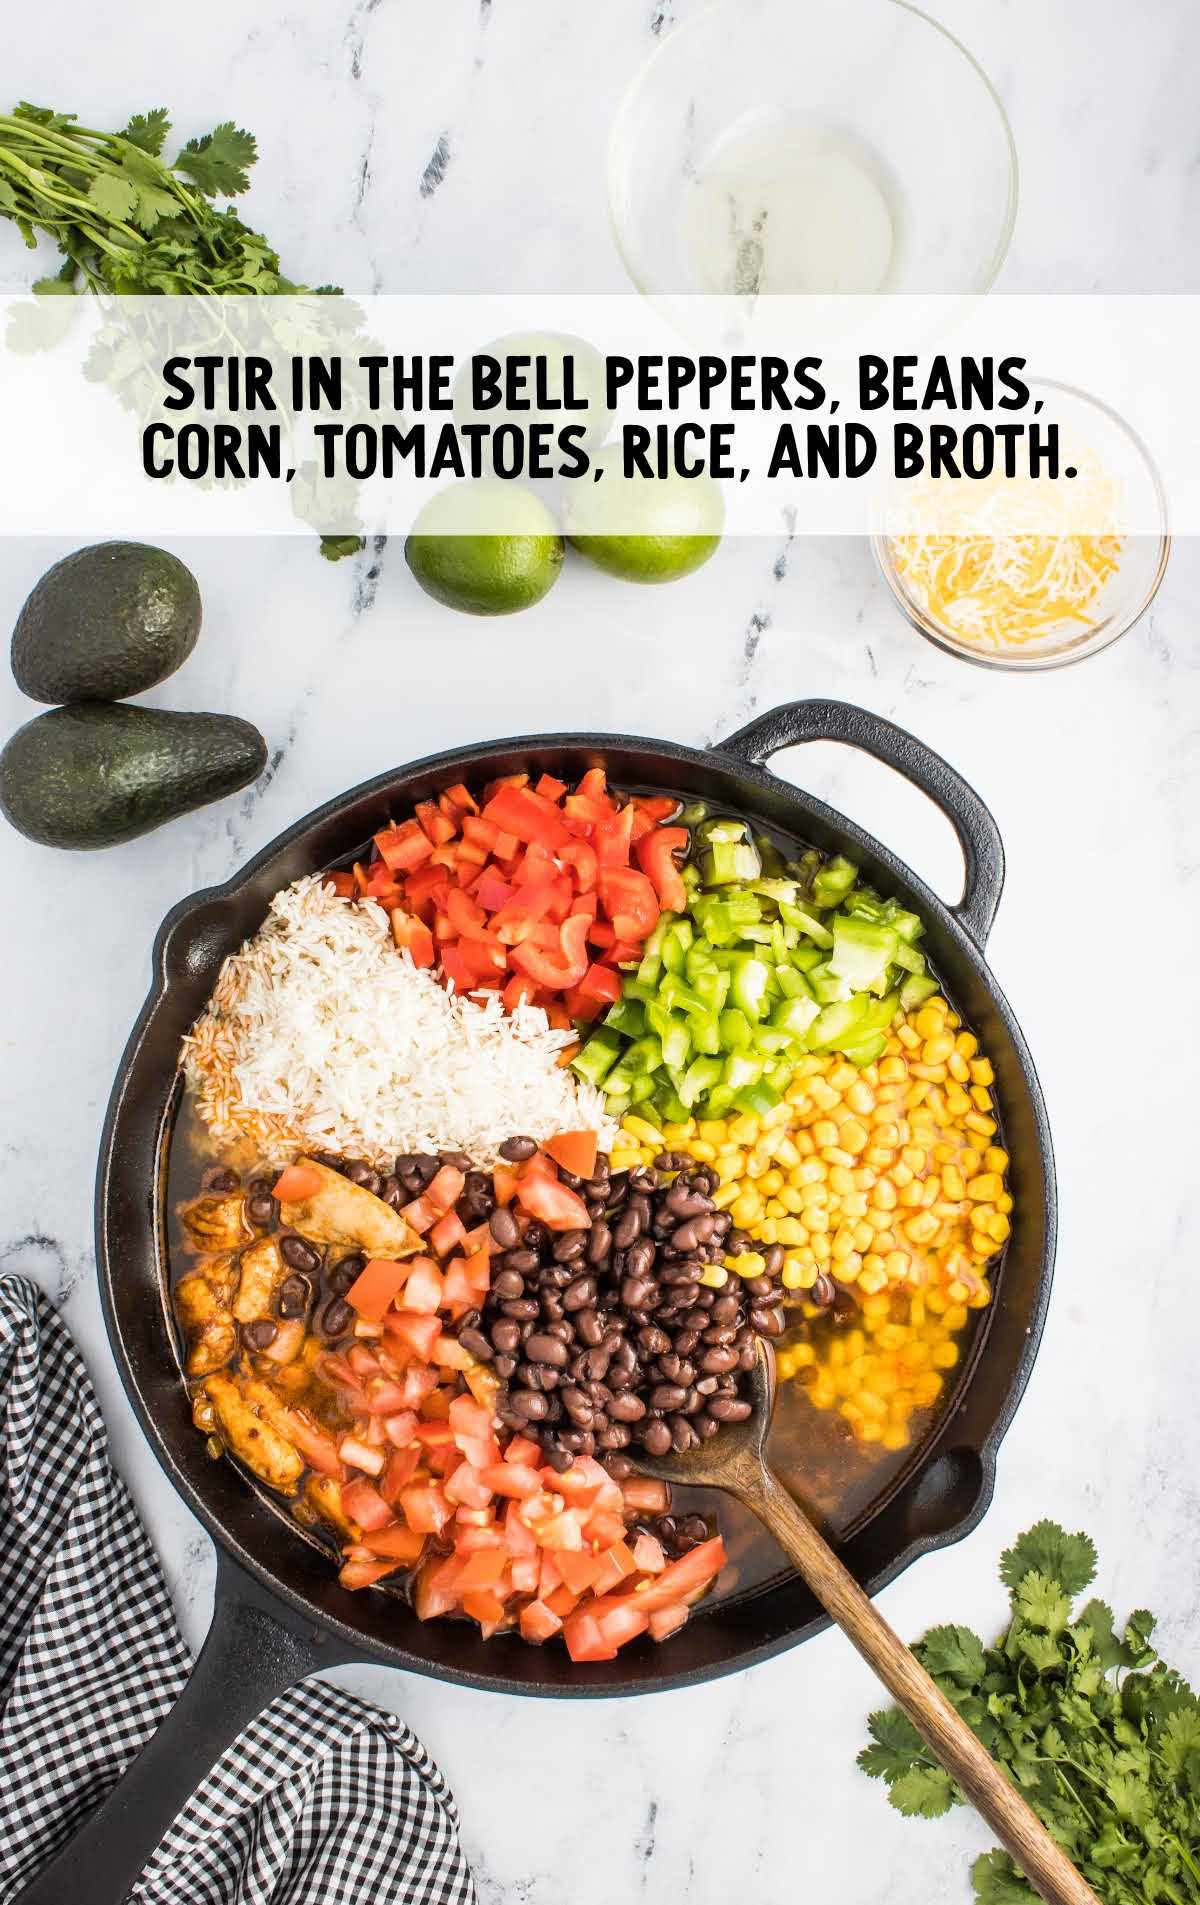 bell peppers, beans, corn, tomatoes, rice and broth stirred together